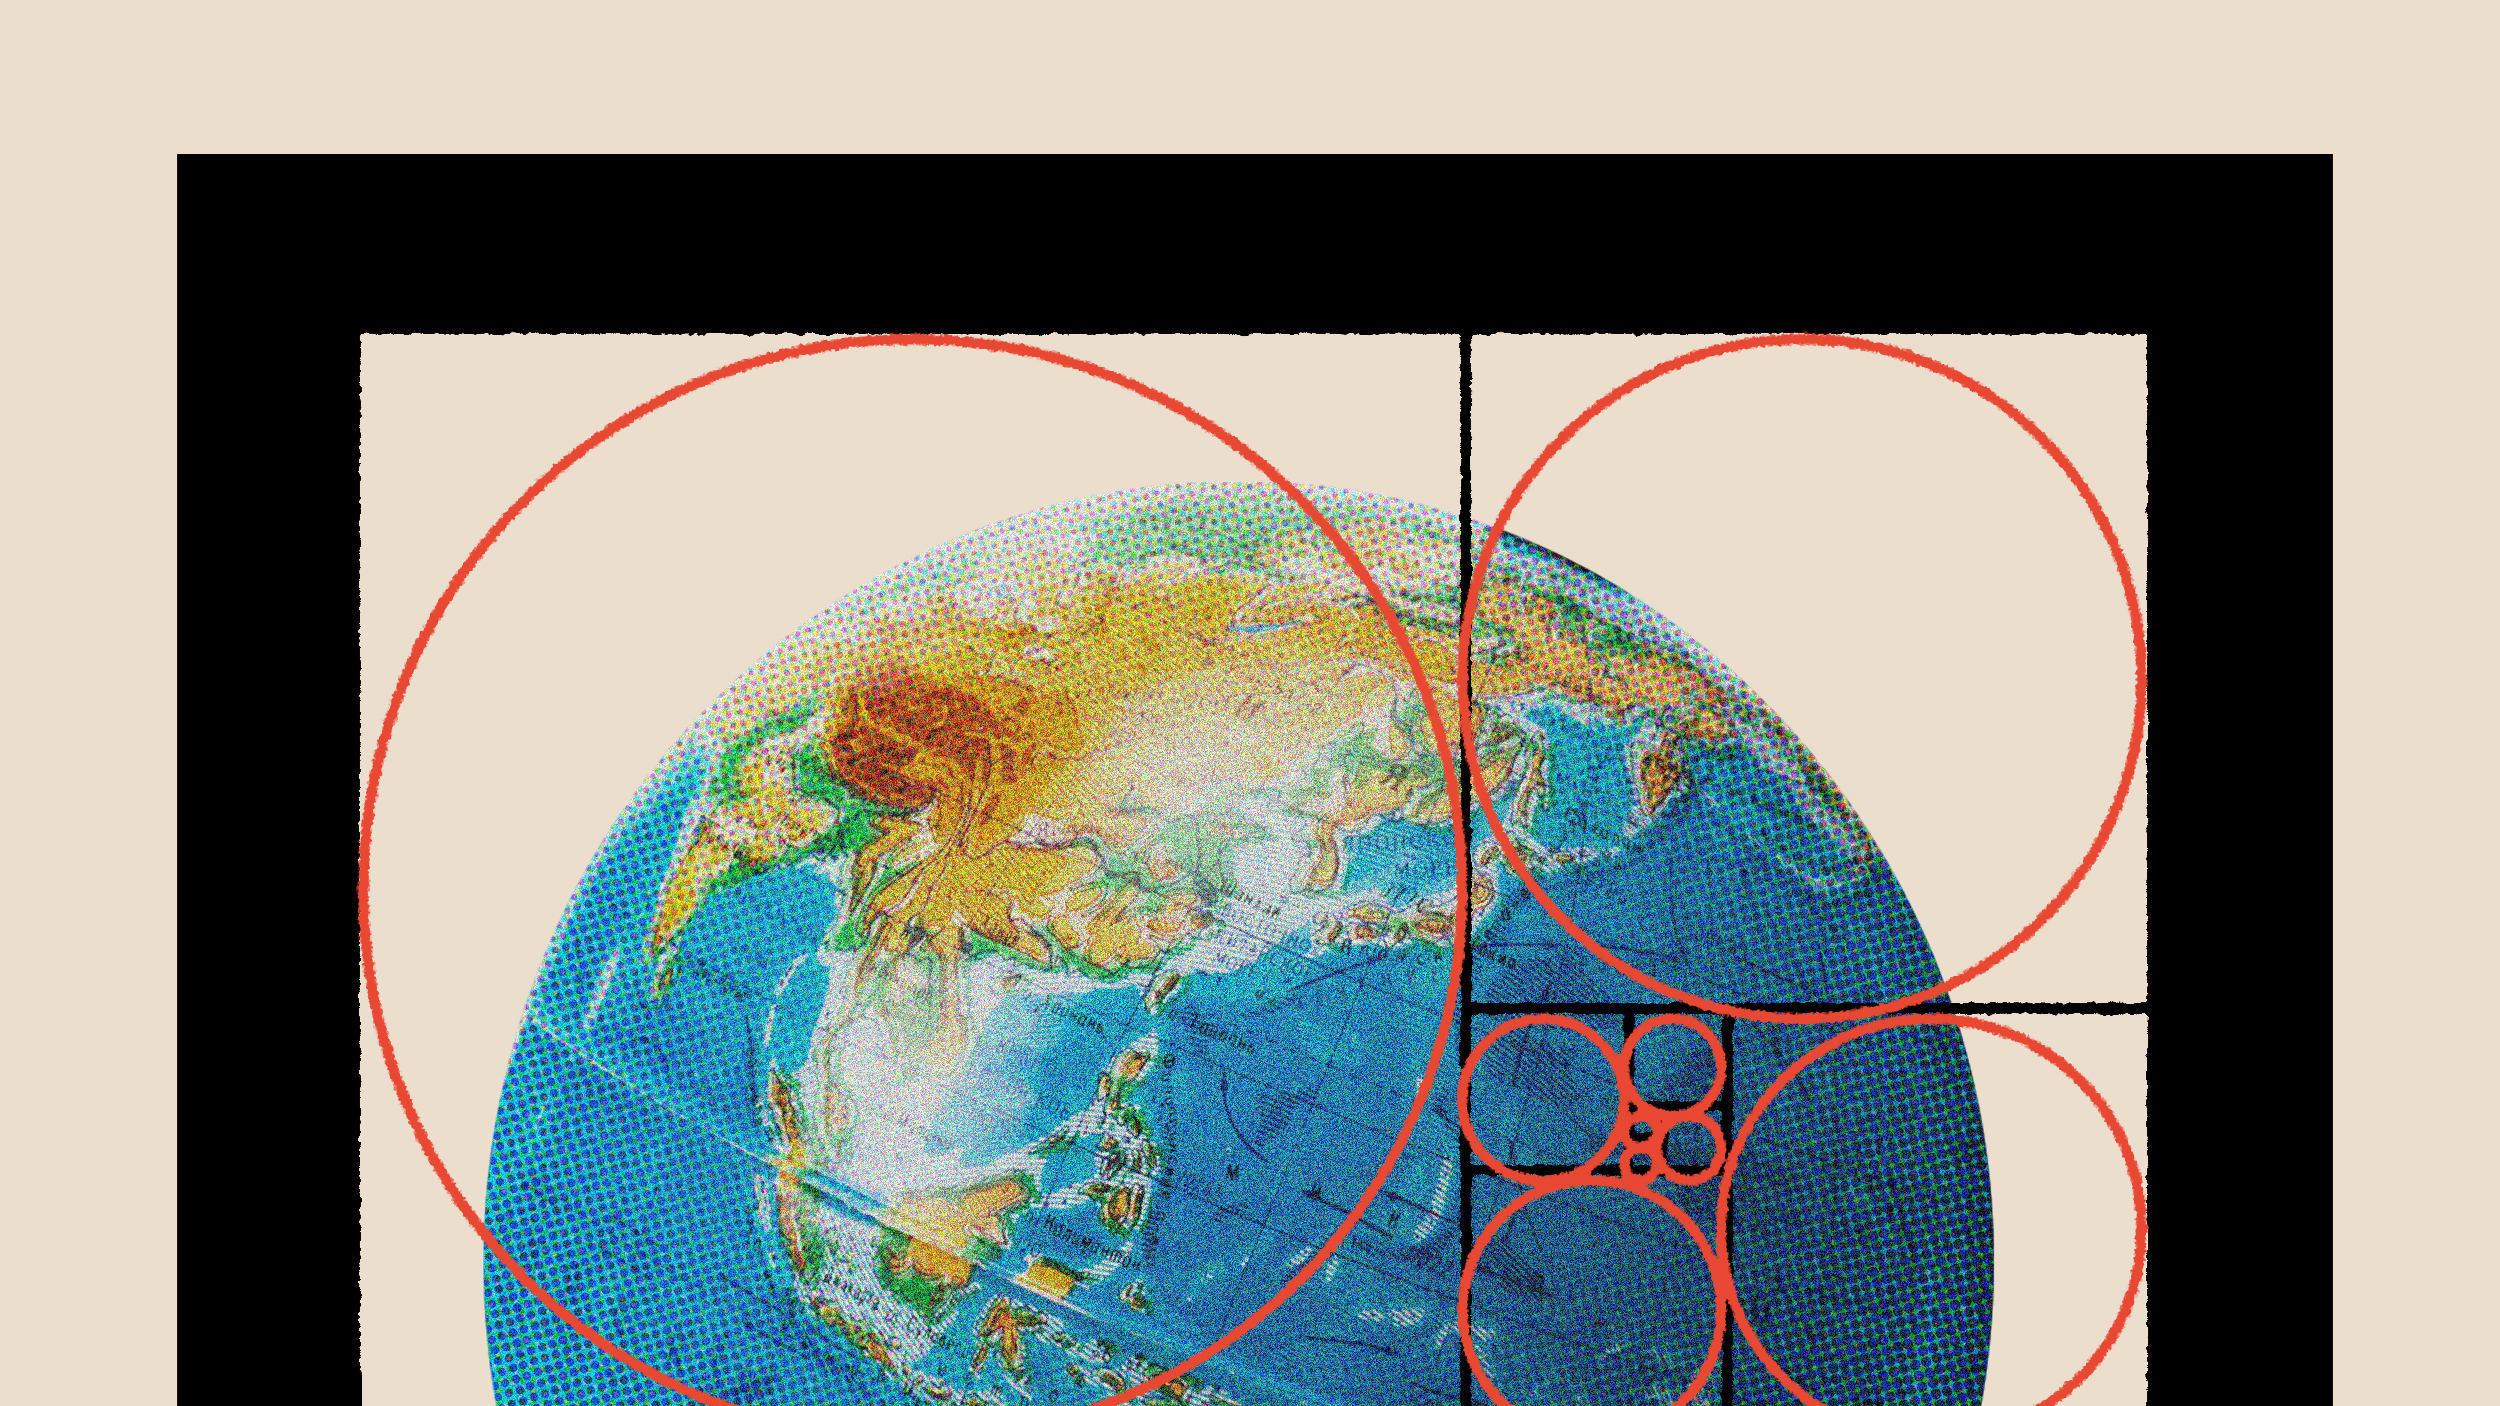 Illustration of Earth with red geometric circles overlaid, emphasizing the Asian continent and the Pacific Ocean, highlighting concerns of overpopulation.